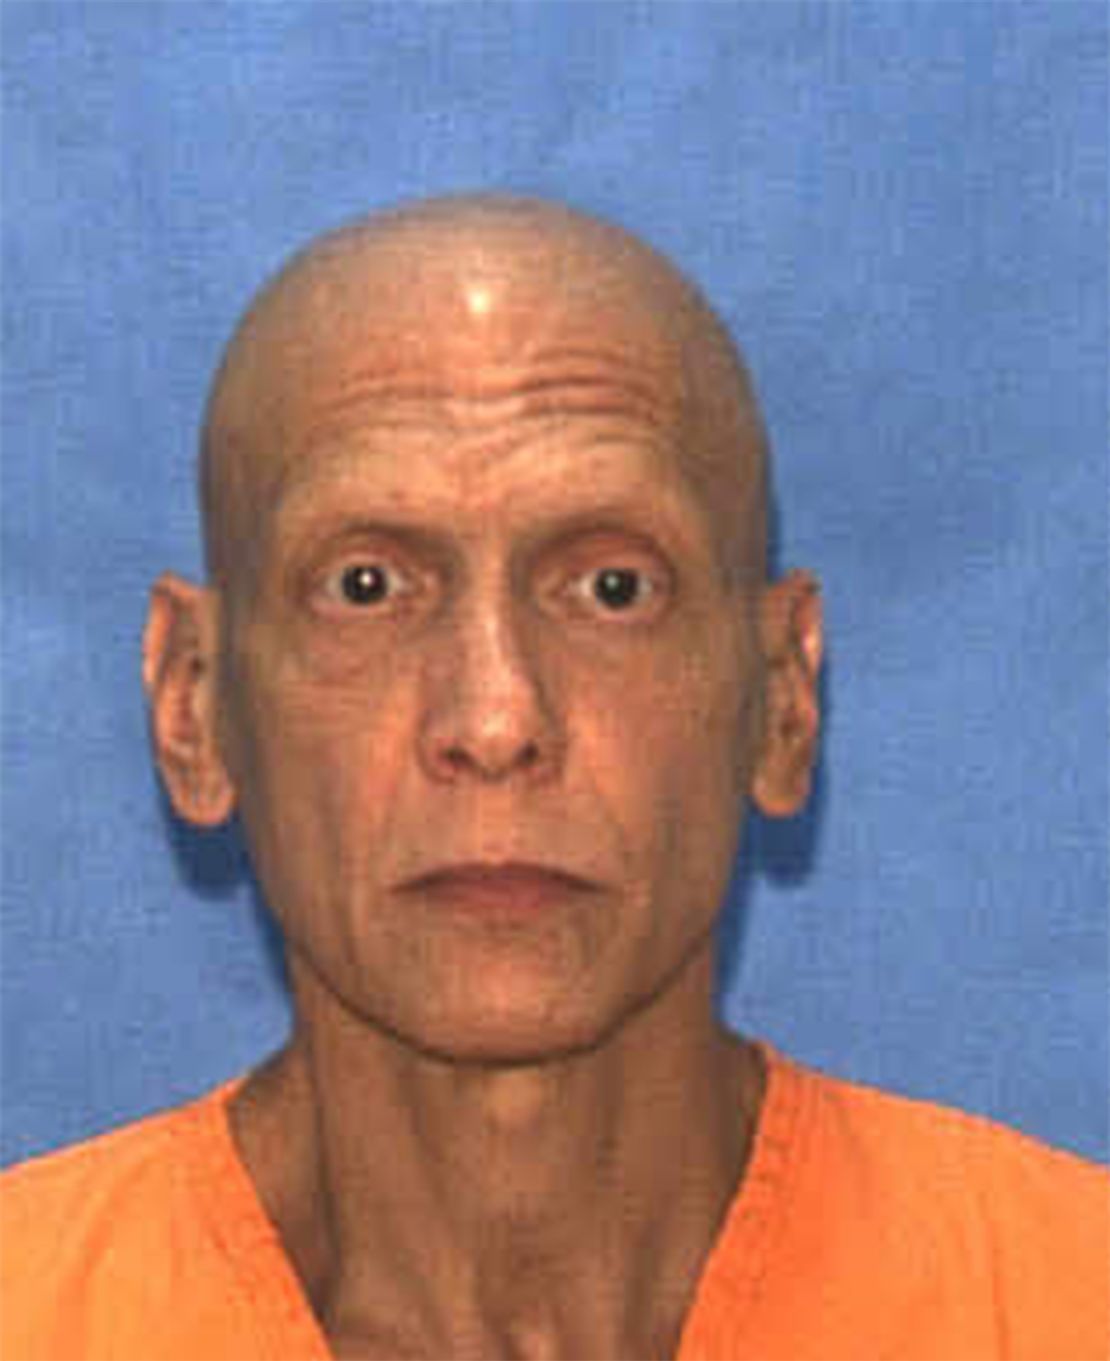 Manuel Pardo, 56, was convicted of nine counts of first-degree murder in 1988 and was sentenced to death.